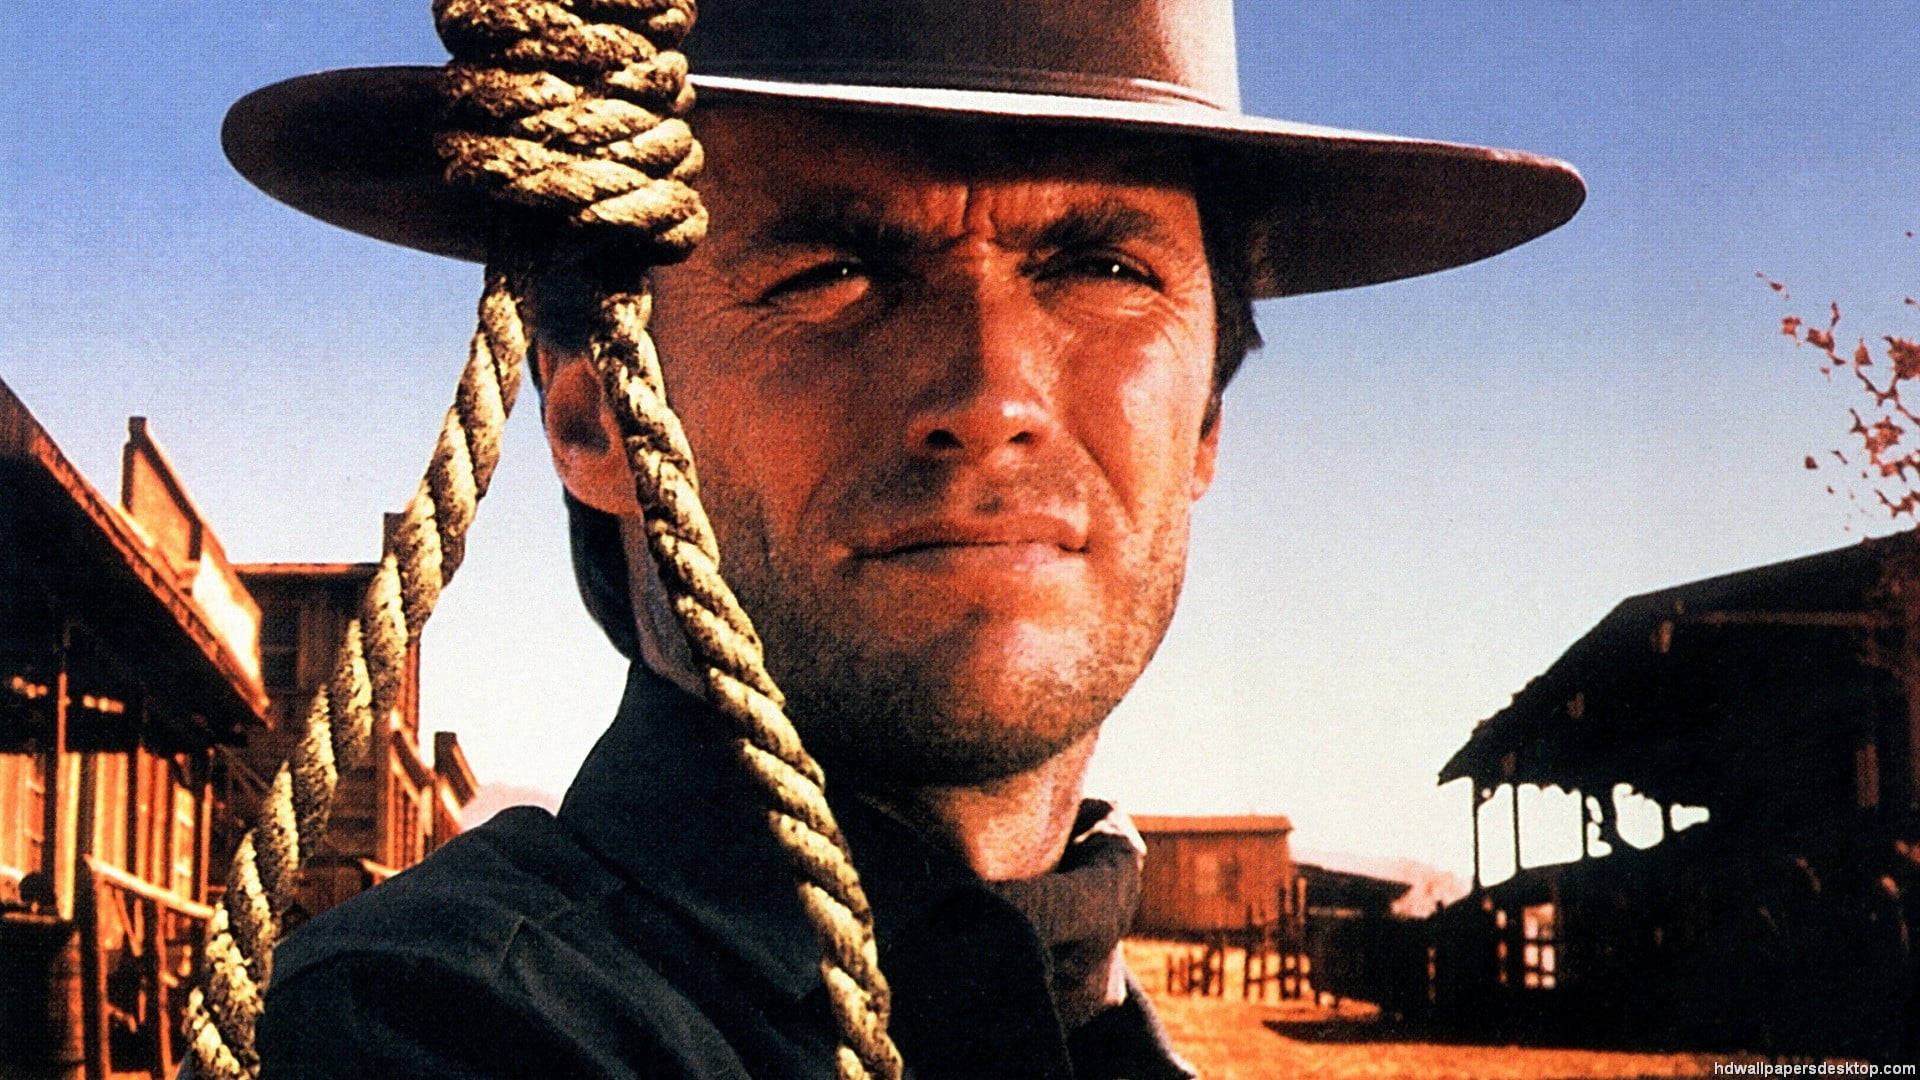 Legendary Clint Eastwood In A Pensive Mood In 'the Good, The Bad And The Ugly' Background